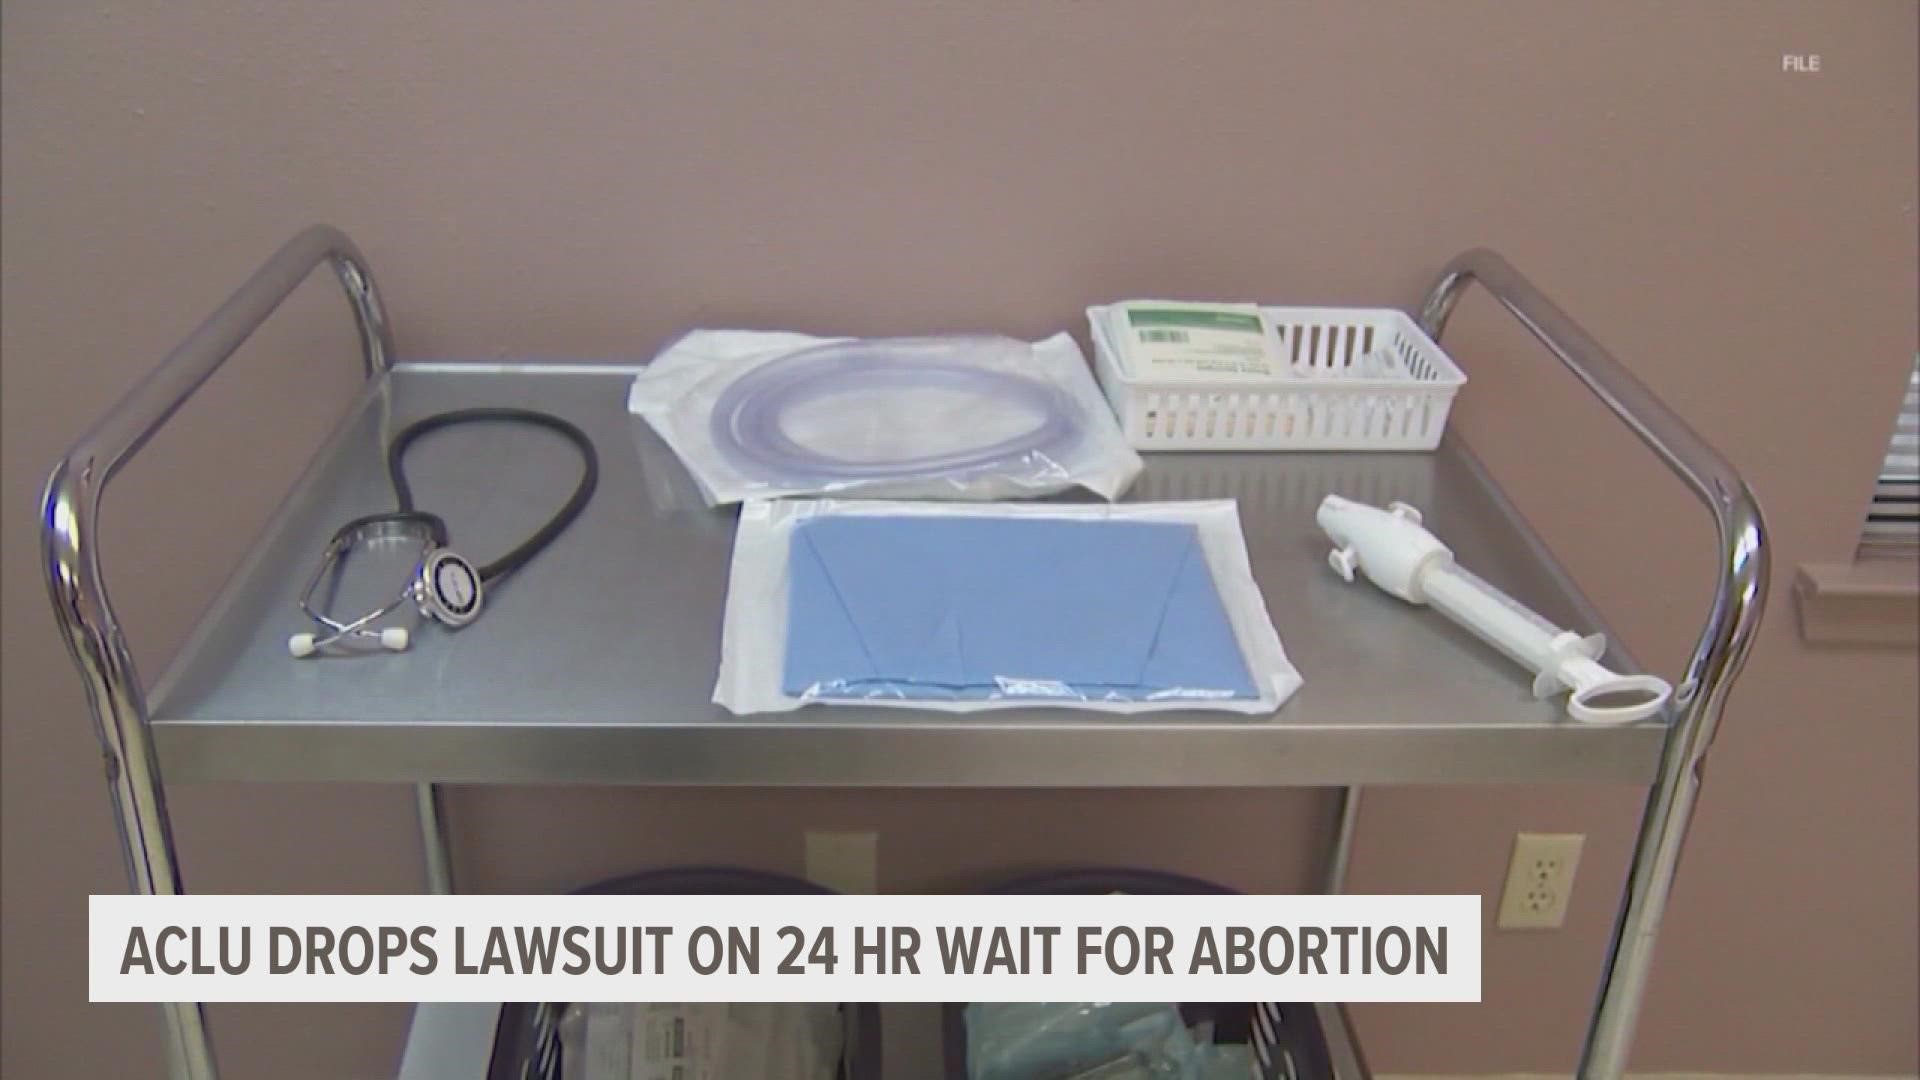 Abortion remains legal in Iowa for now, but Gov. Kim Reynolds said she will ask the courts to revive a six-week abortion ban law that another judge blocked in 2019.